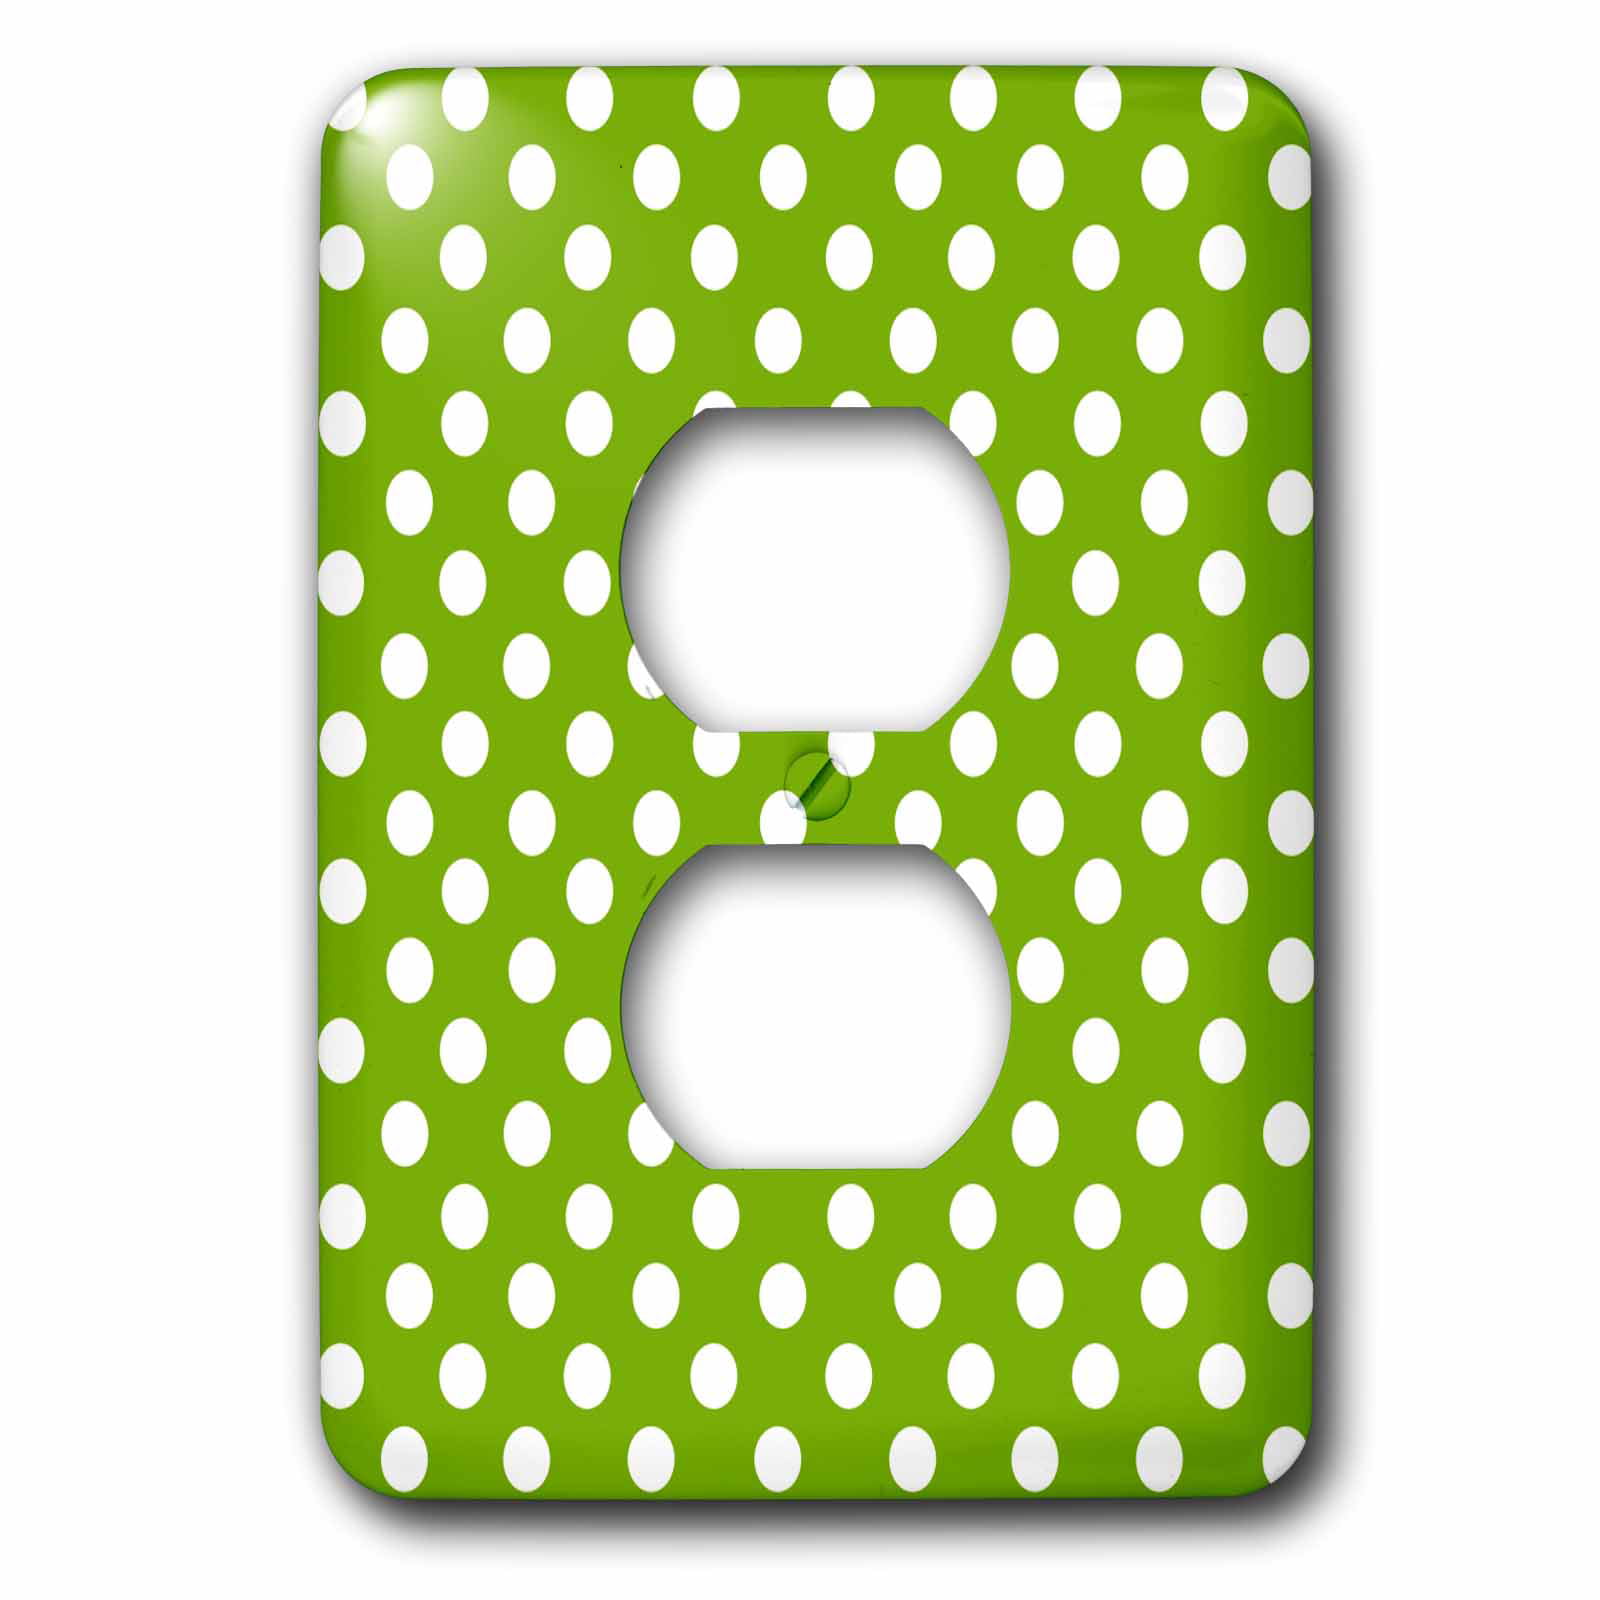 3dRose lsp_56695_6 White Polka Dots on Green Retro 1950S Vintage Style Dot Pattern 2 Plug Outlet Cover